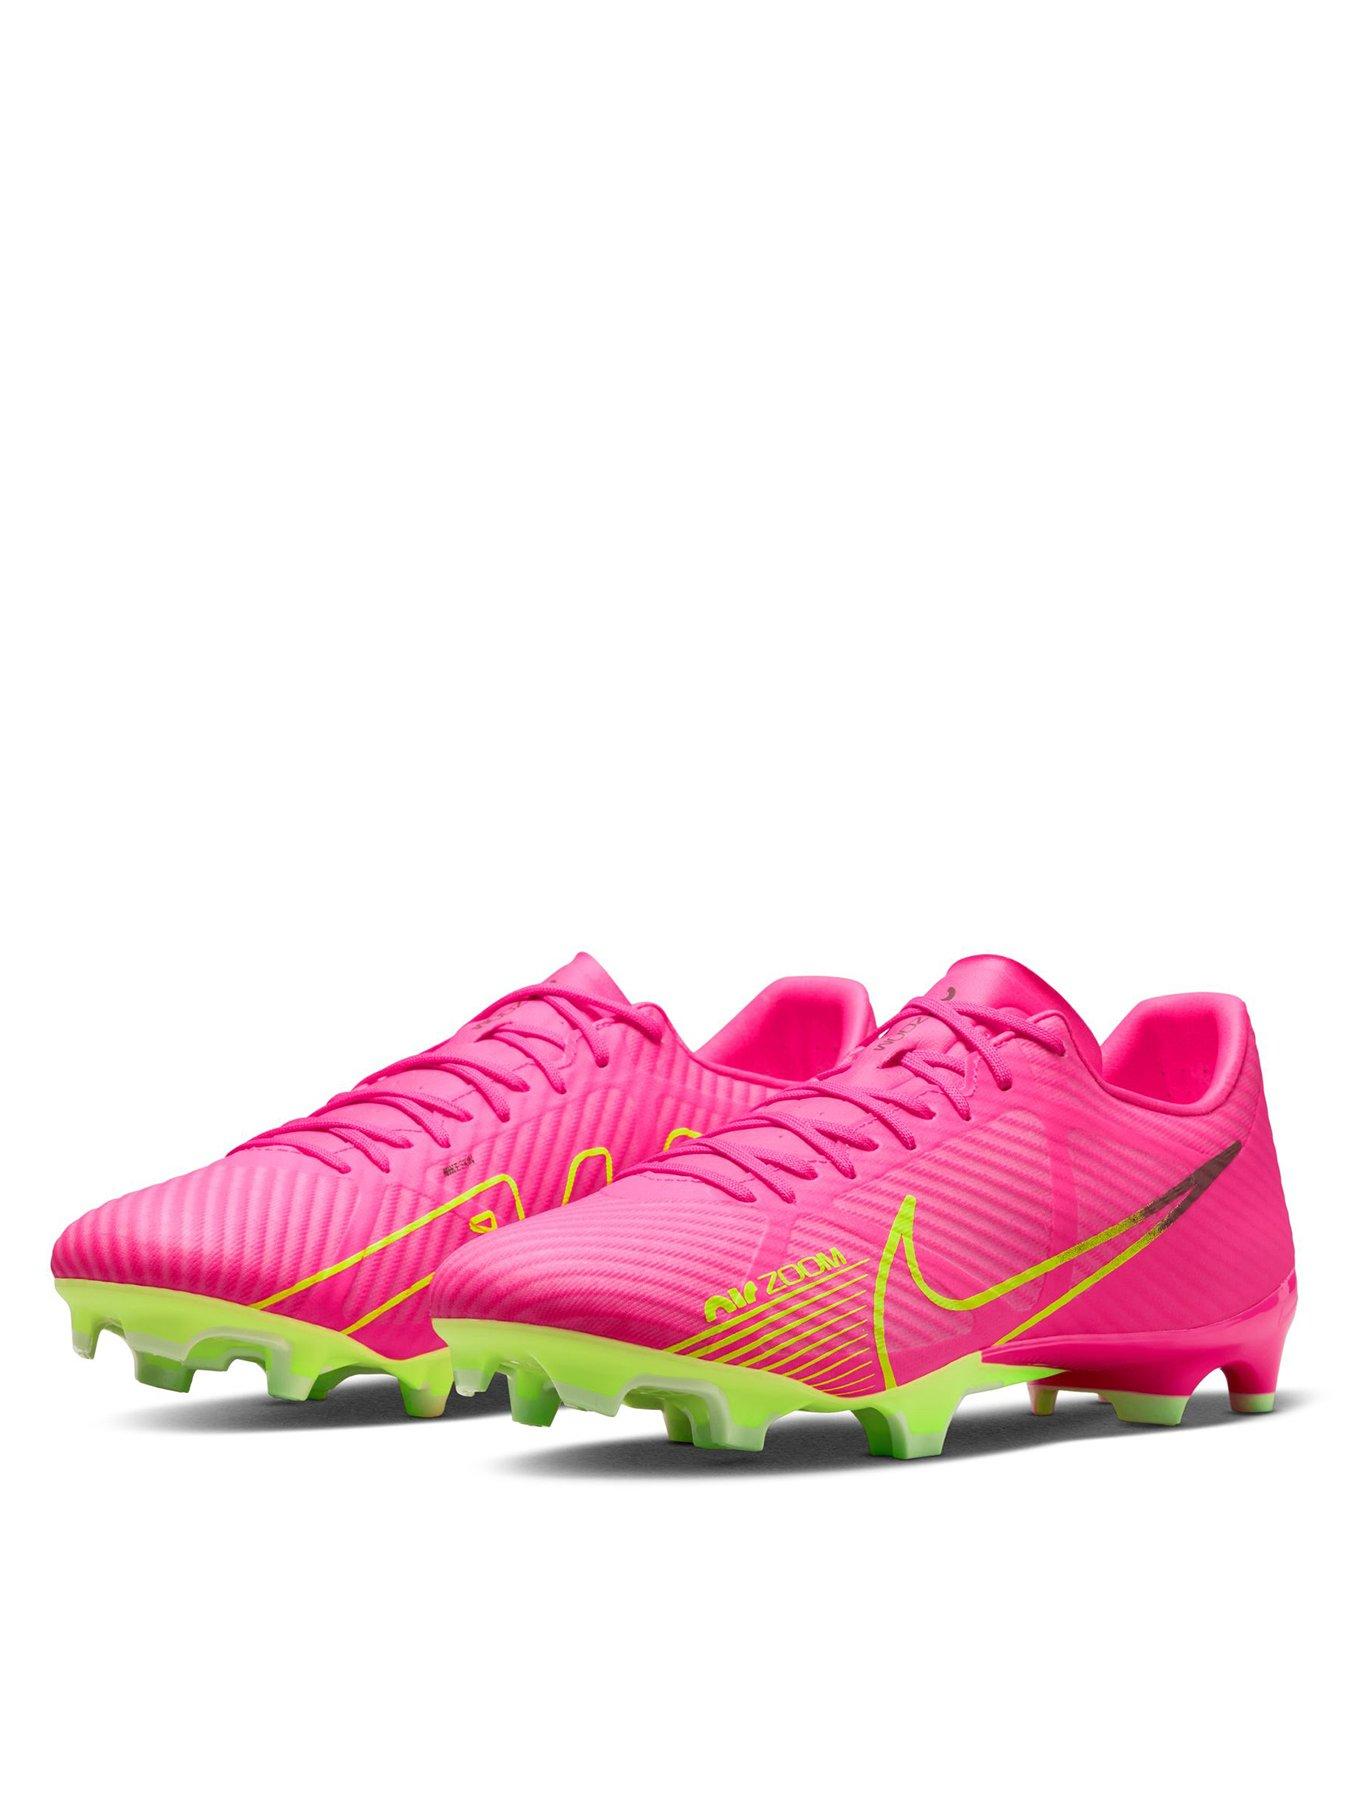 Men's Football Boots & Shoes. Get Up To 25% Off. Nike UK